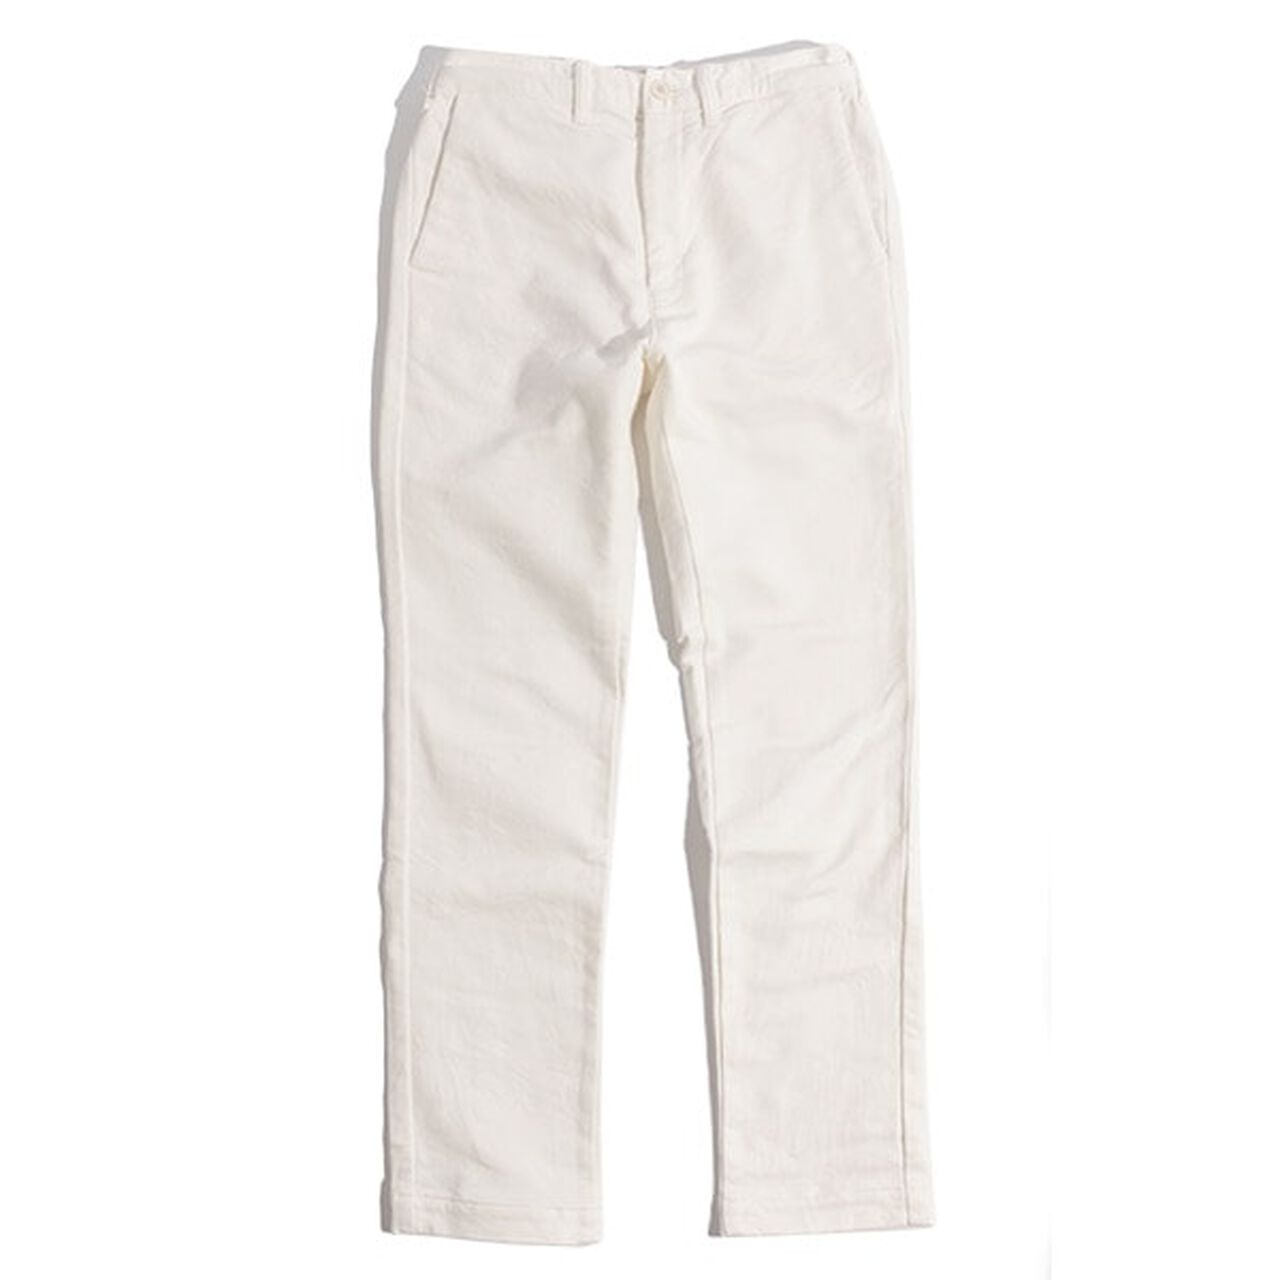 F0438 Relaxed Narrow Easy Pants,White, large image number 0